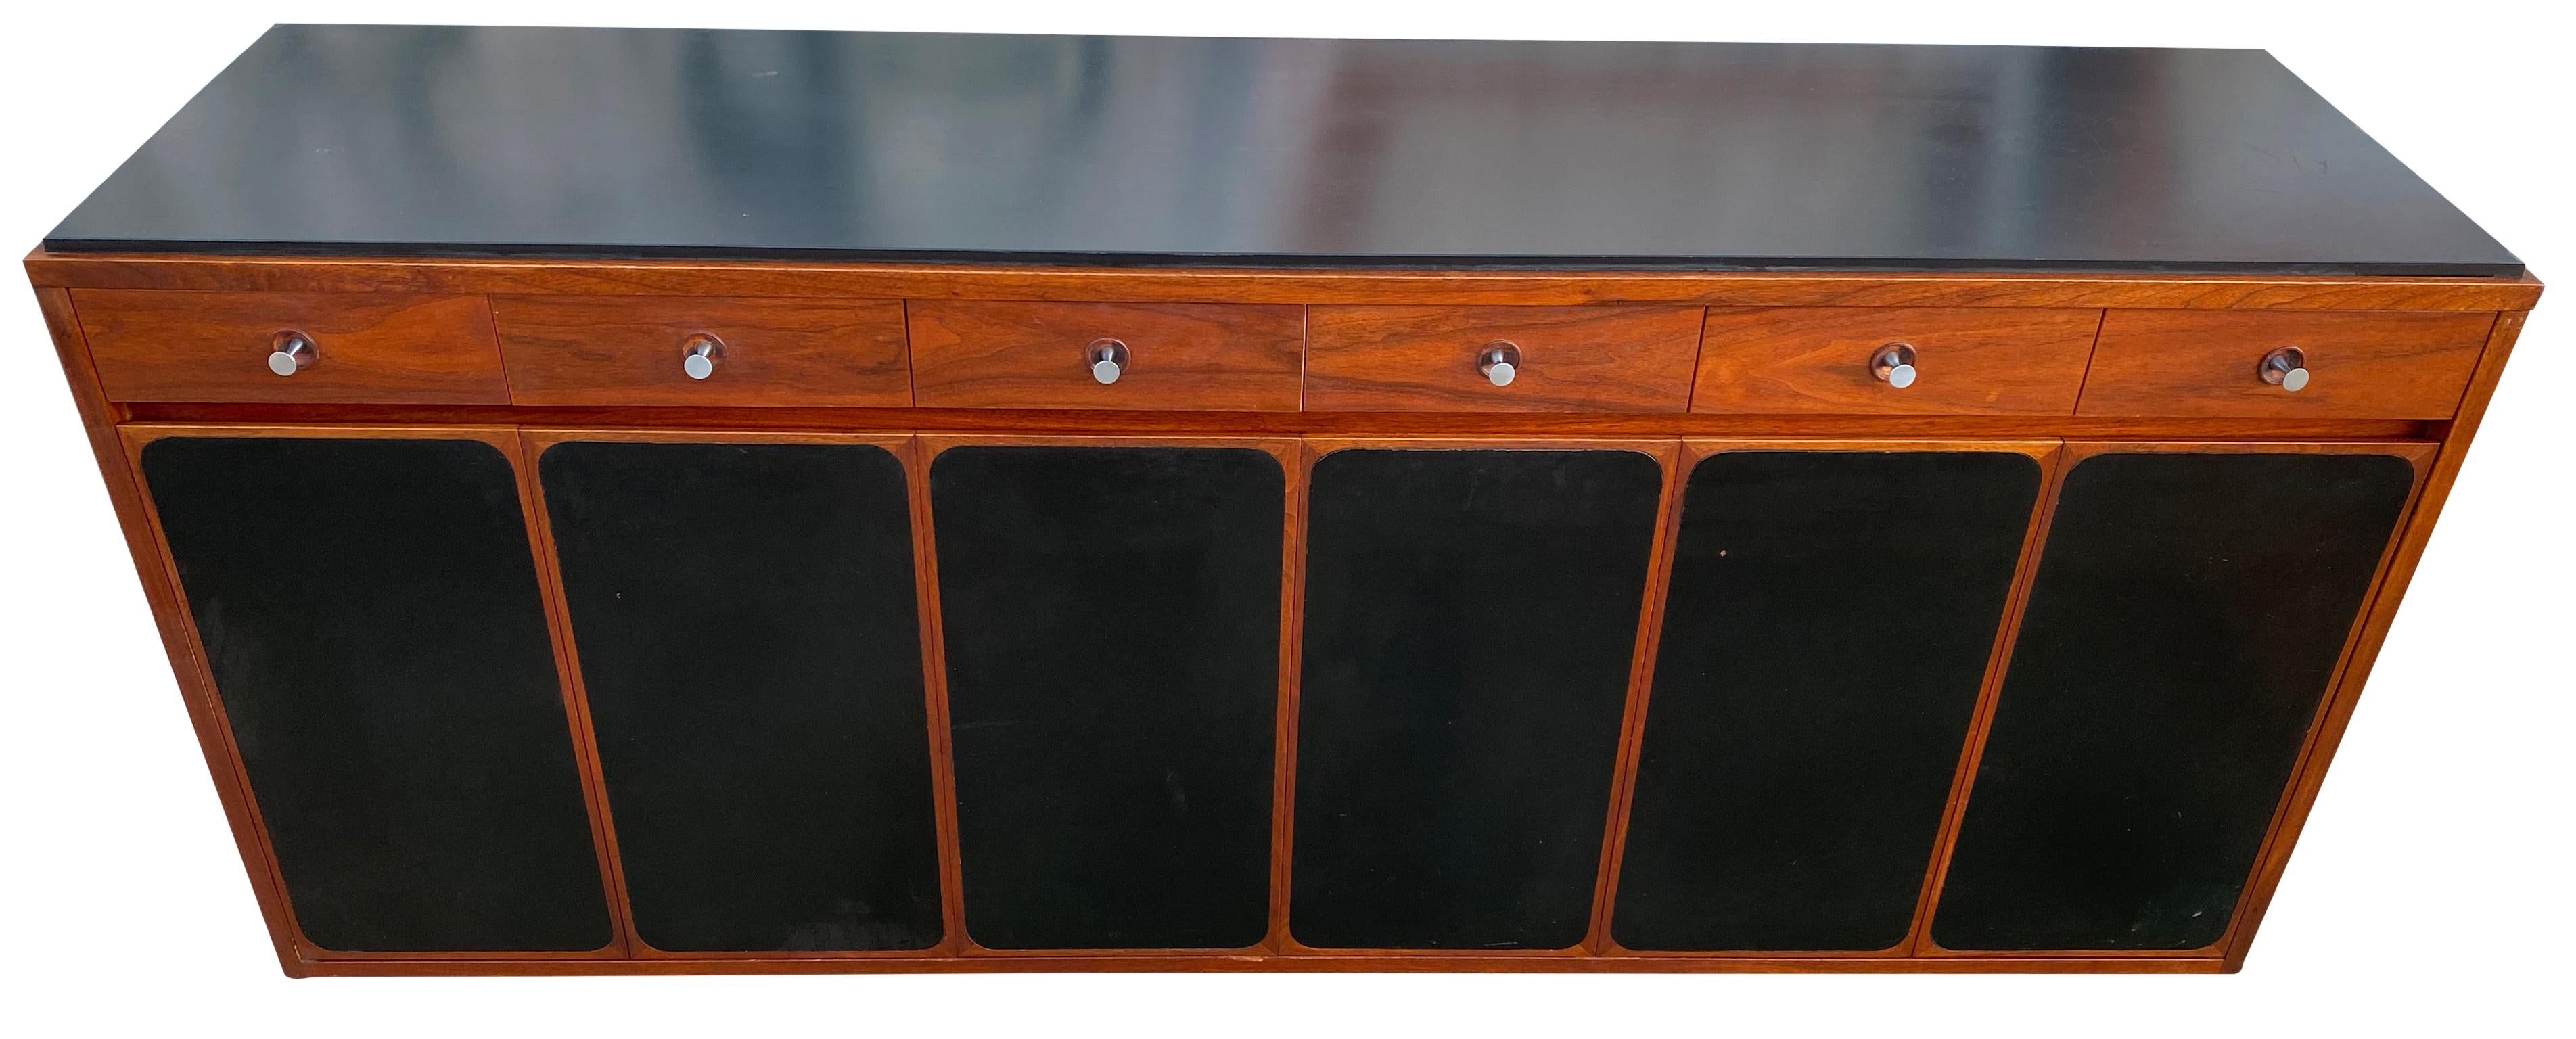 Rare midcentury American designer Paul McCobb Walnut 14-drawer dresser credenza #1683. Original finish in beautiful vintage condition, has original folding walnut and black leather front accordion doors with magnets in amazing condition, all solid